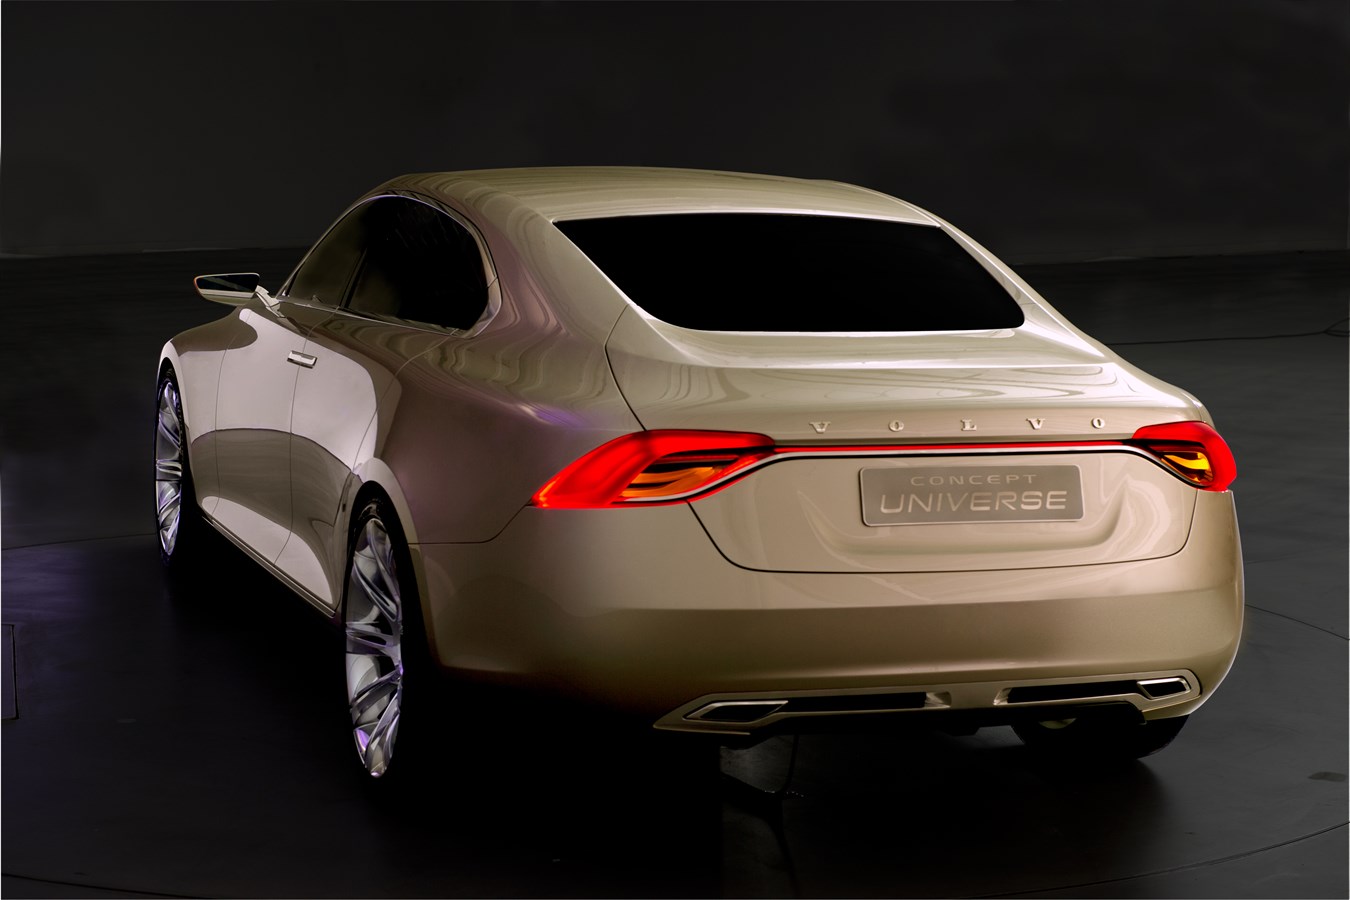 Volvo Concept Universe, rear lights on